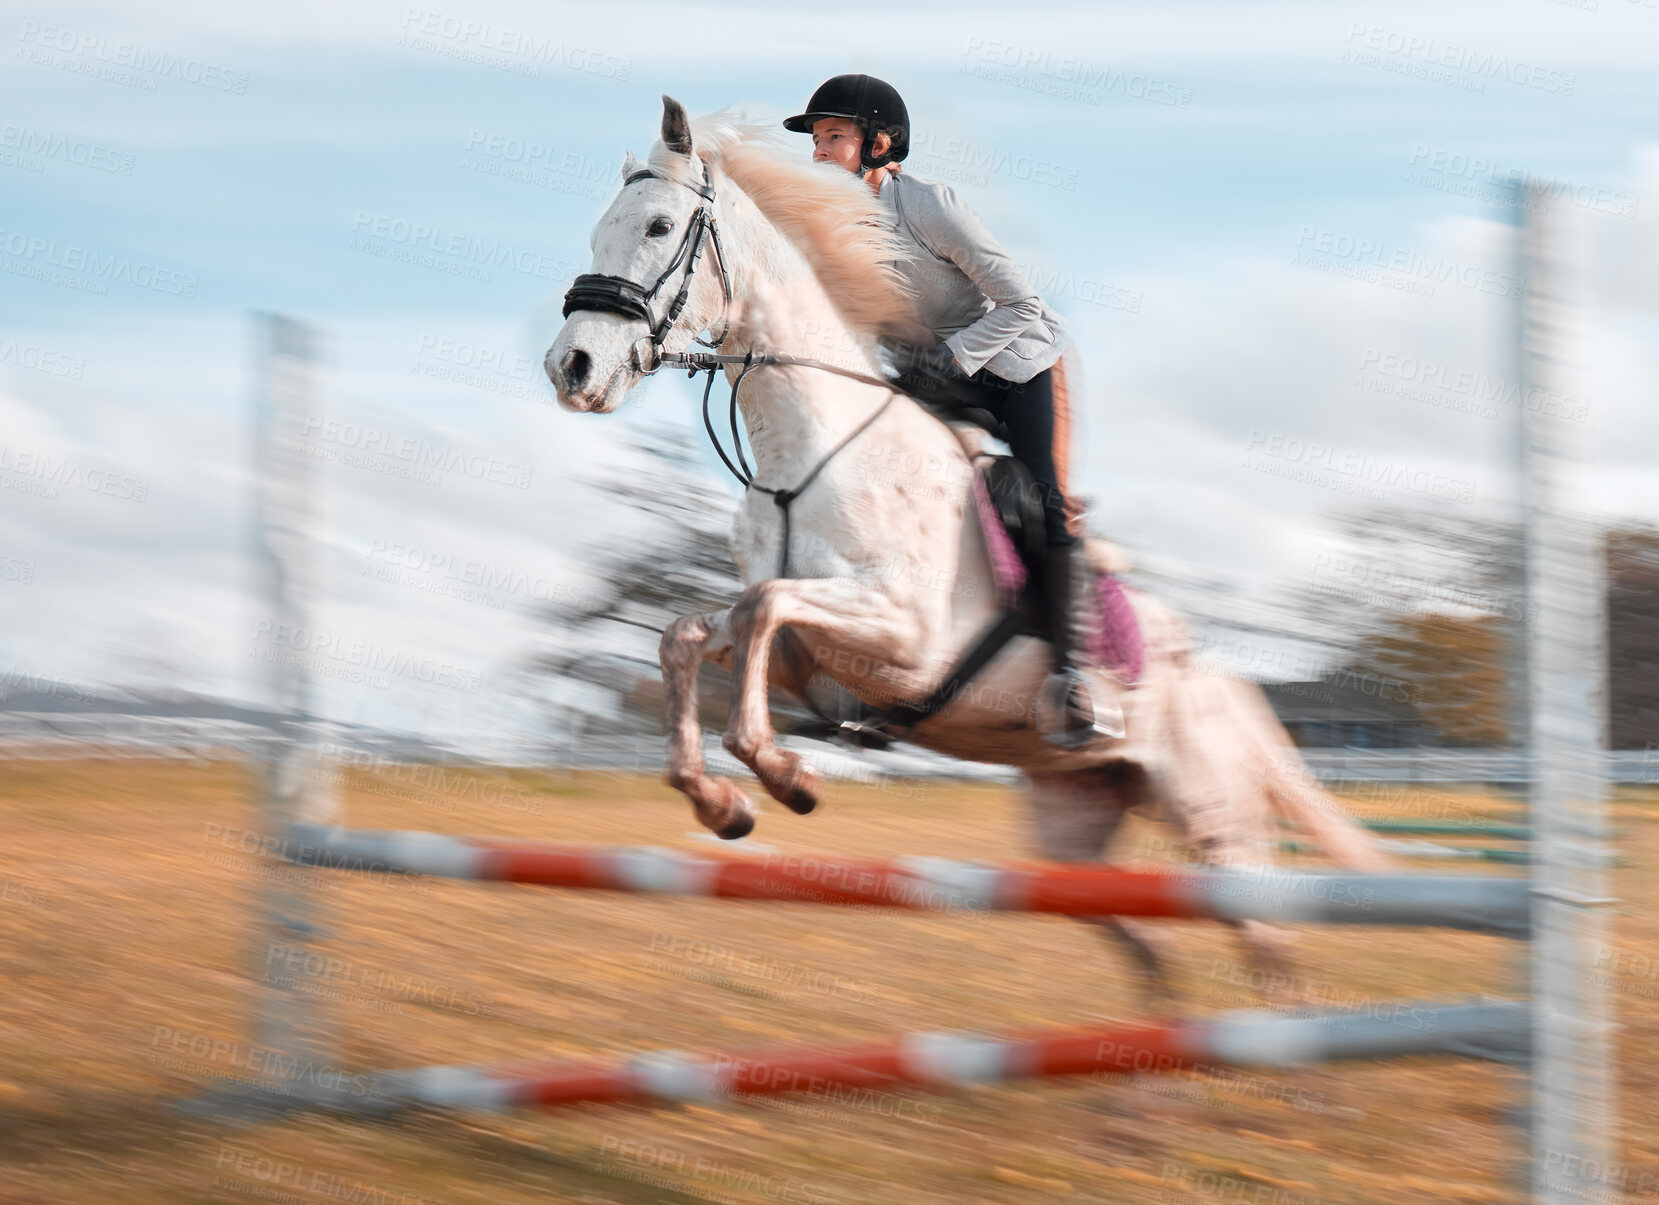 Buy stock photo Shot of a young rider jumping over a hurdle on her horse